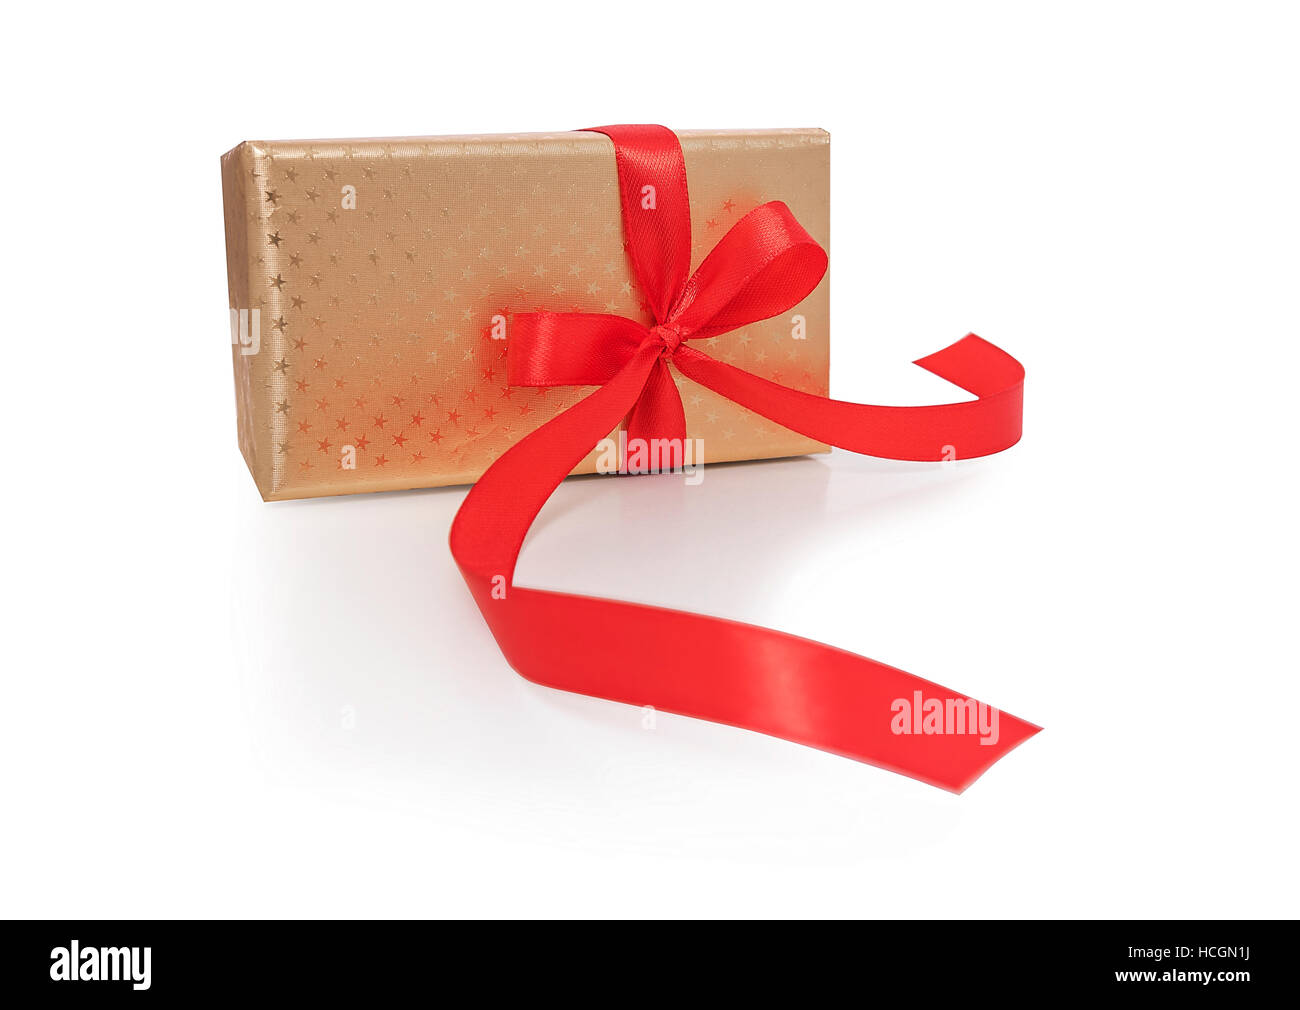 Gold box with red ribbon. Stock Photo